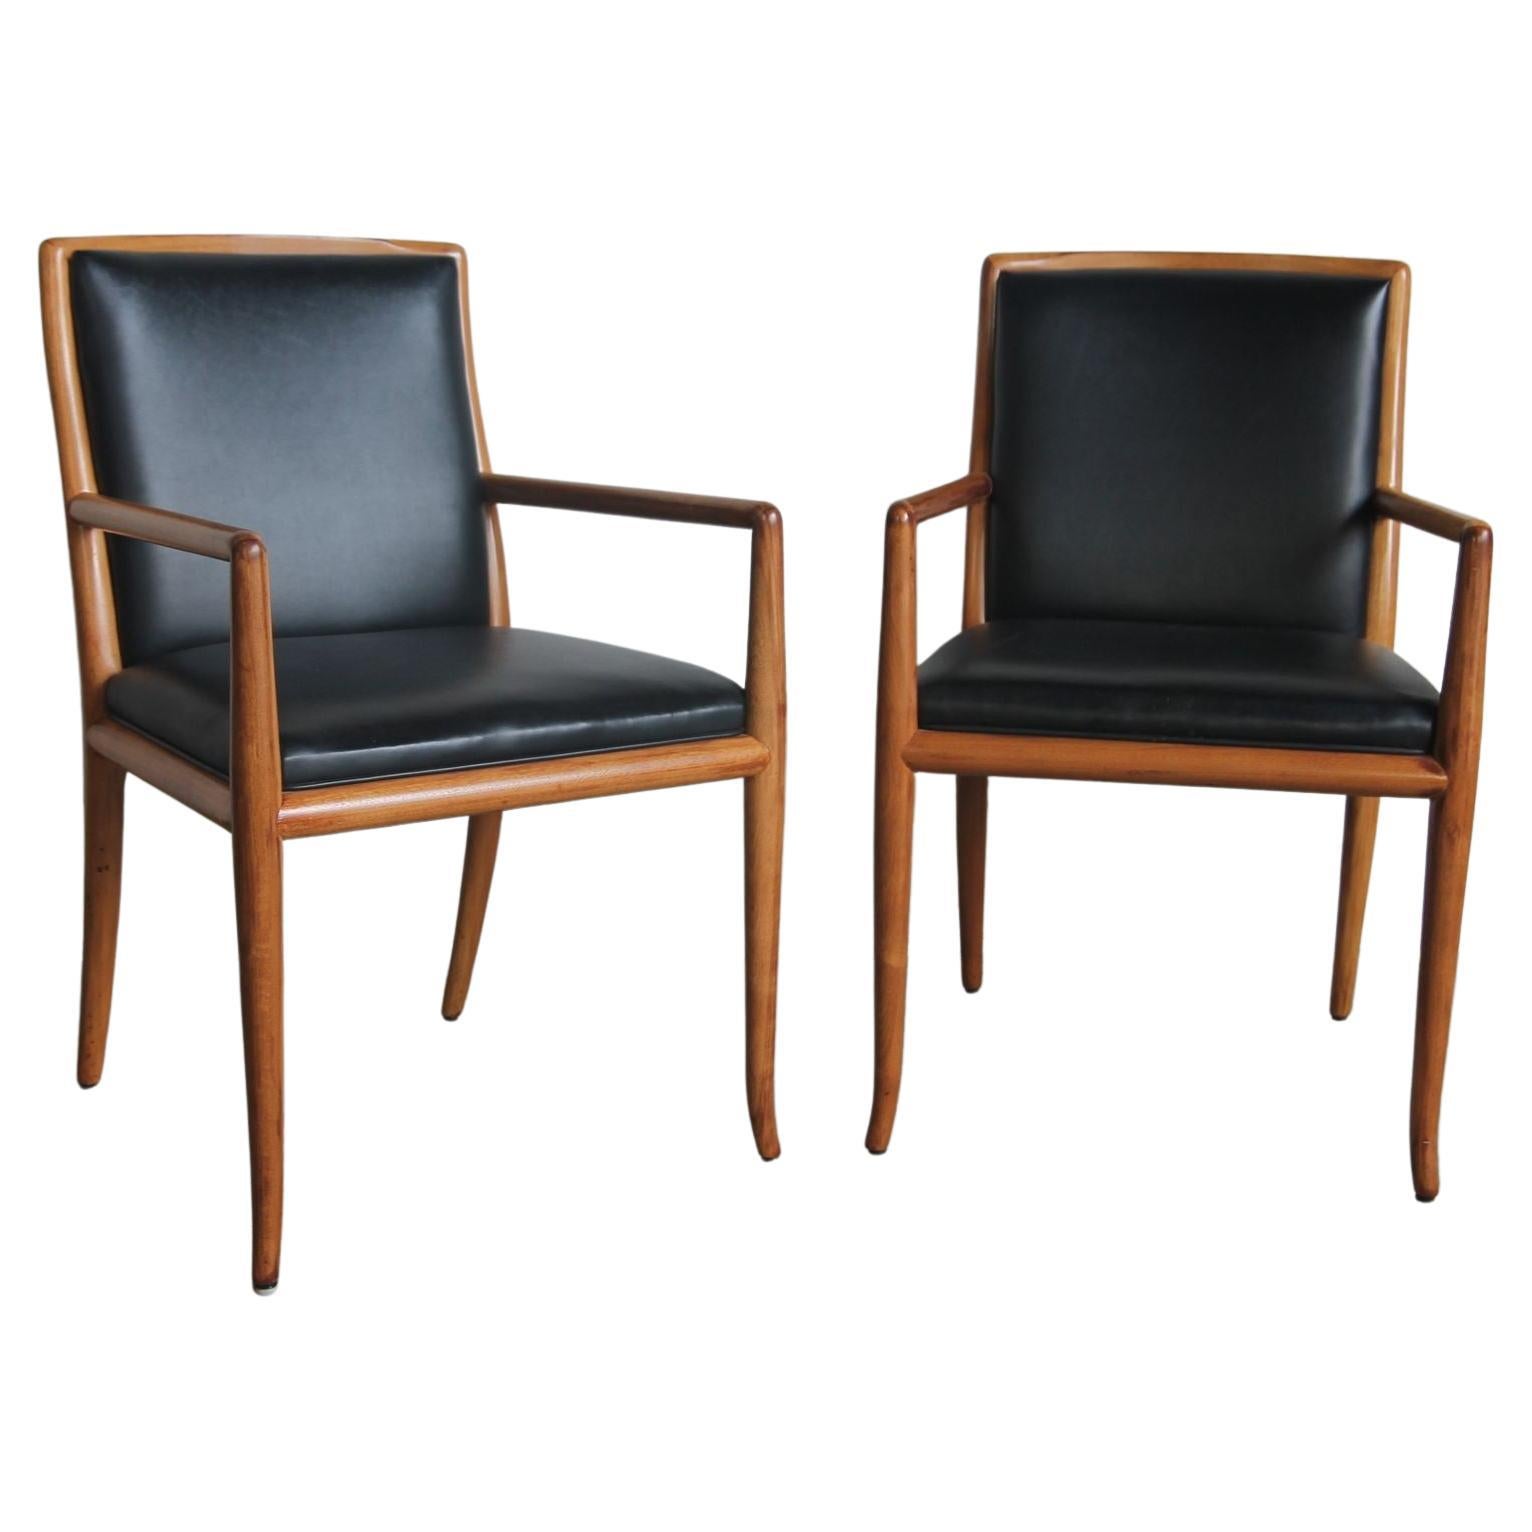 Sabre Leg Dining Chairs with Arms by T.H.Robsjohn-Gibbings for Widdicomb